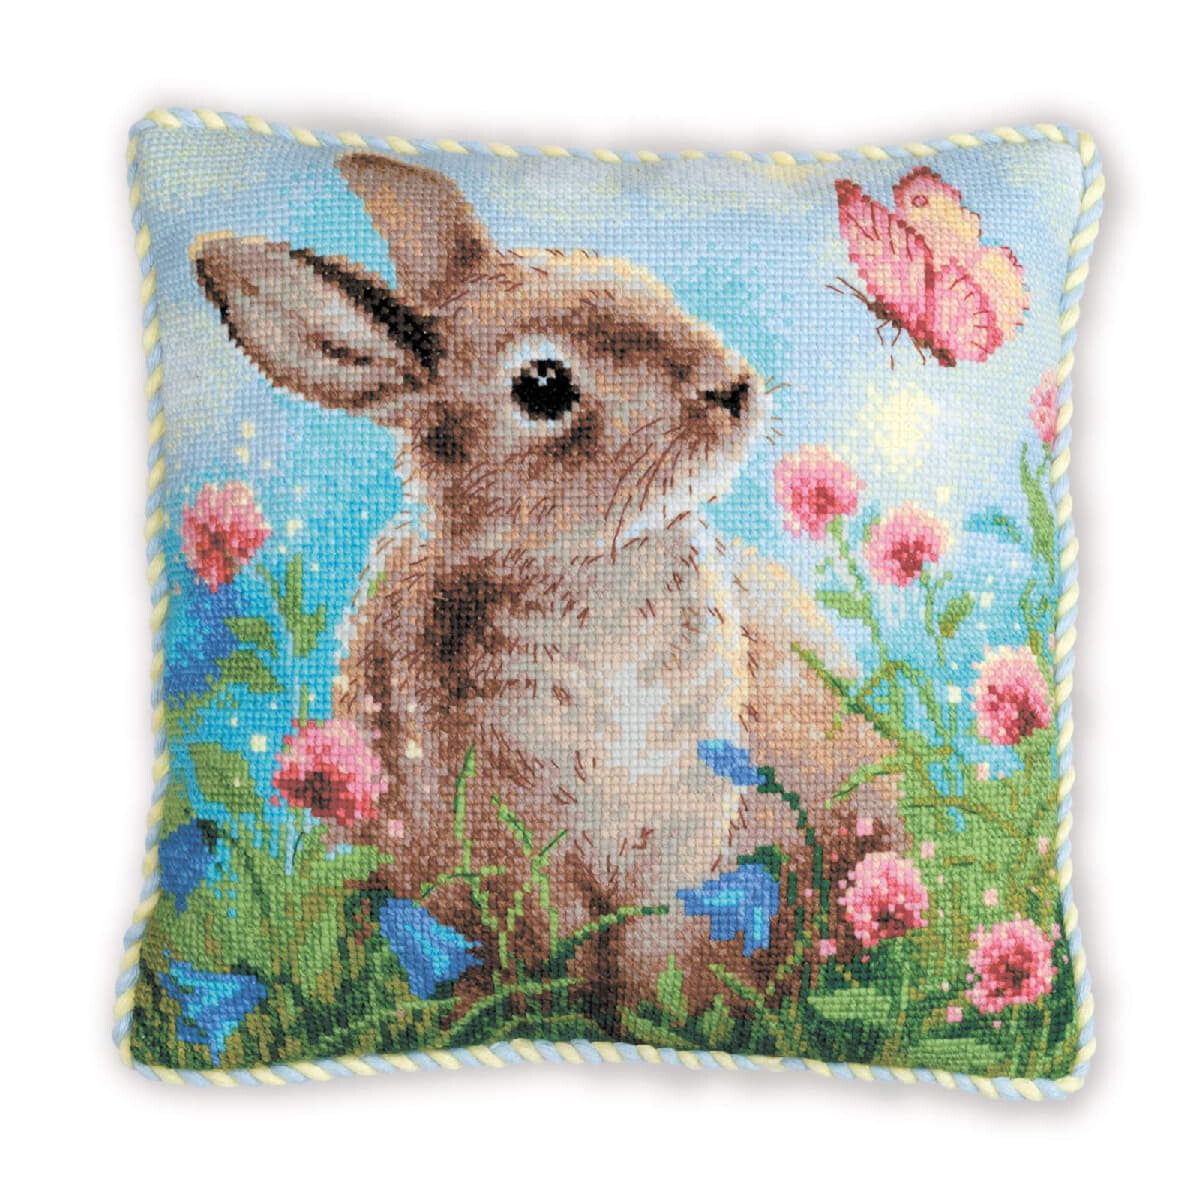 Riolis counted cross stitch kit cushion "Bunny in...